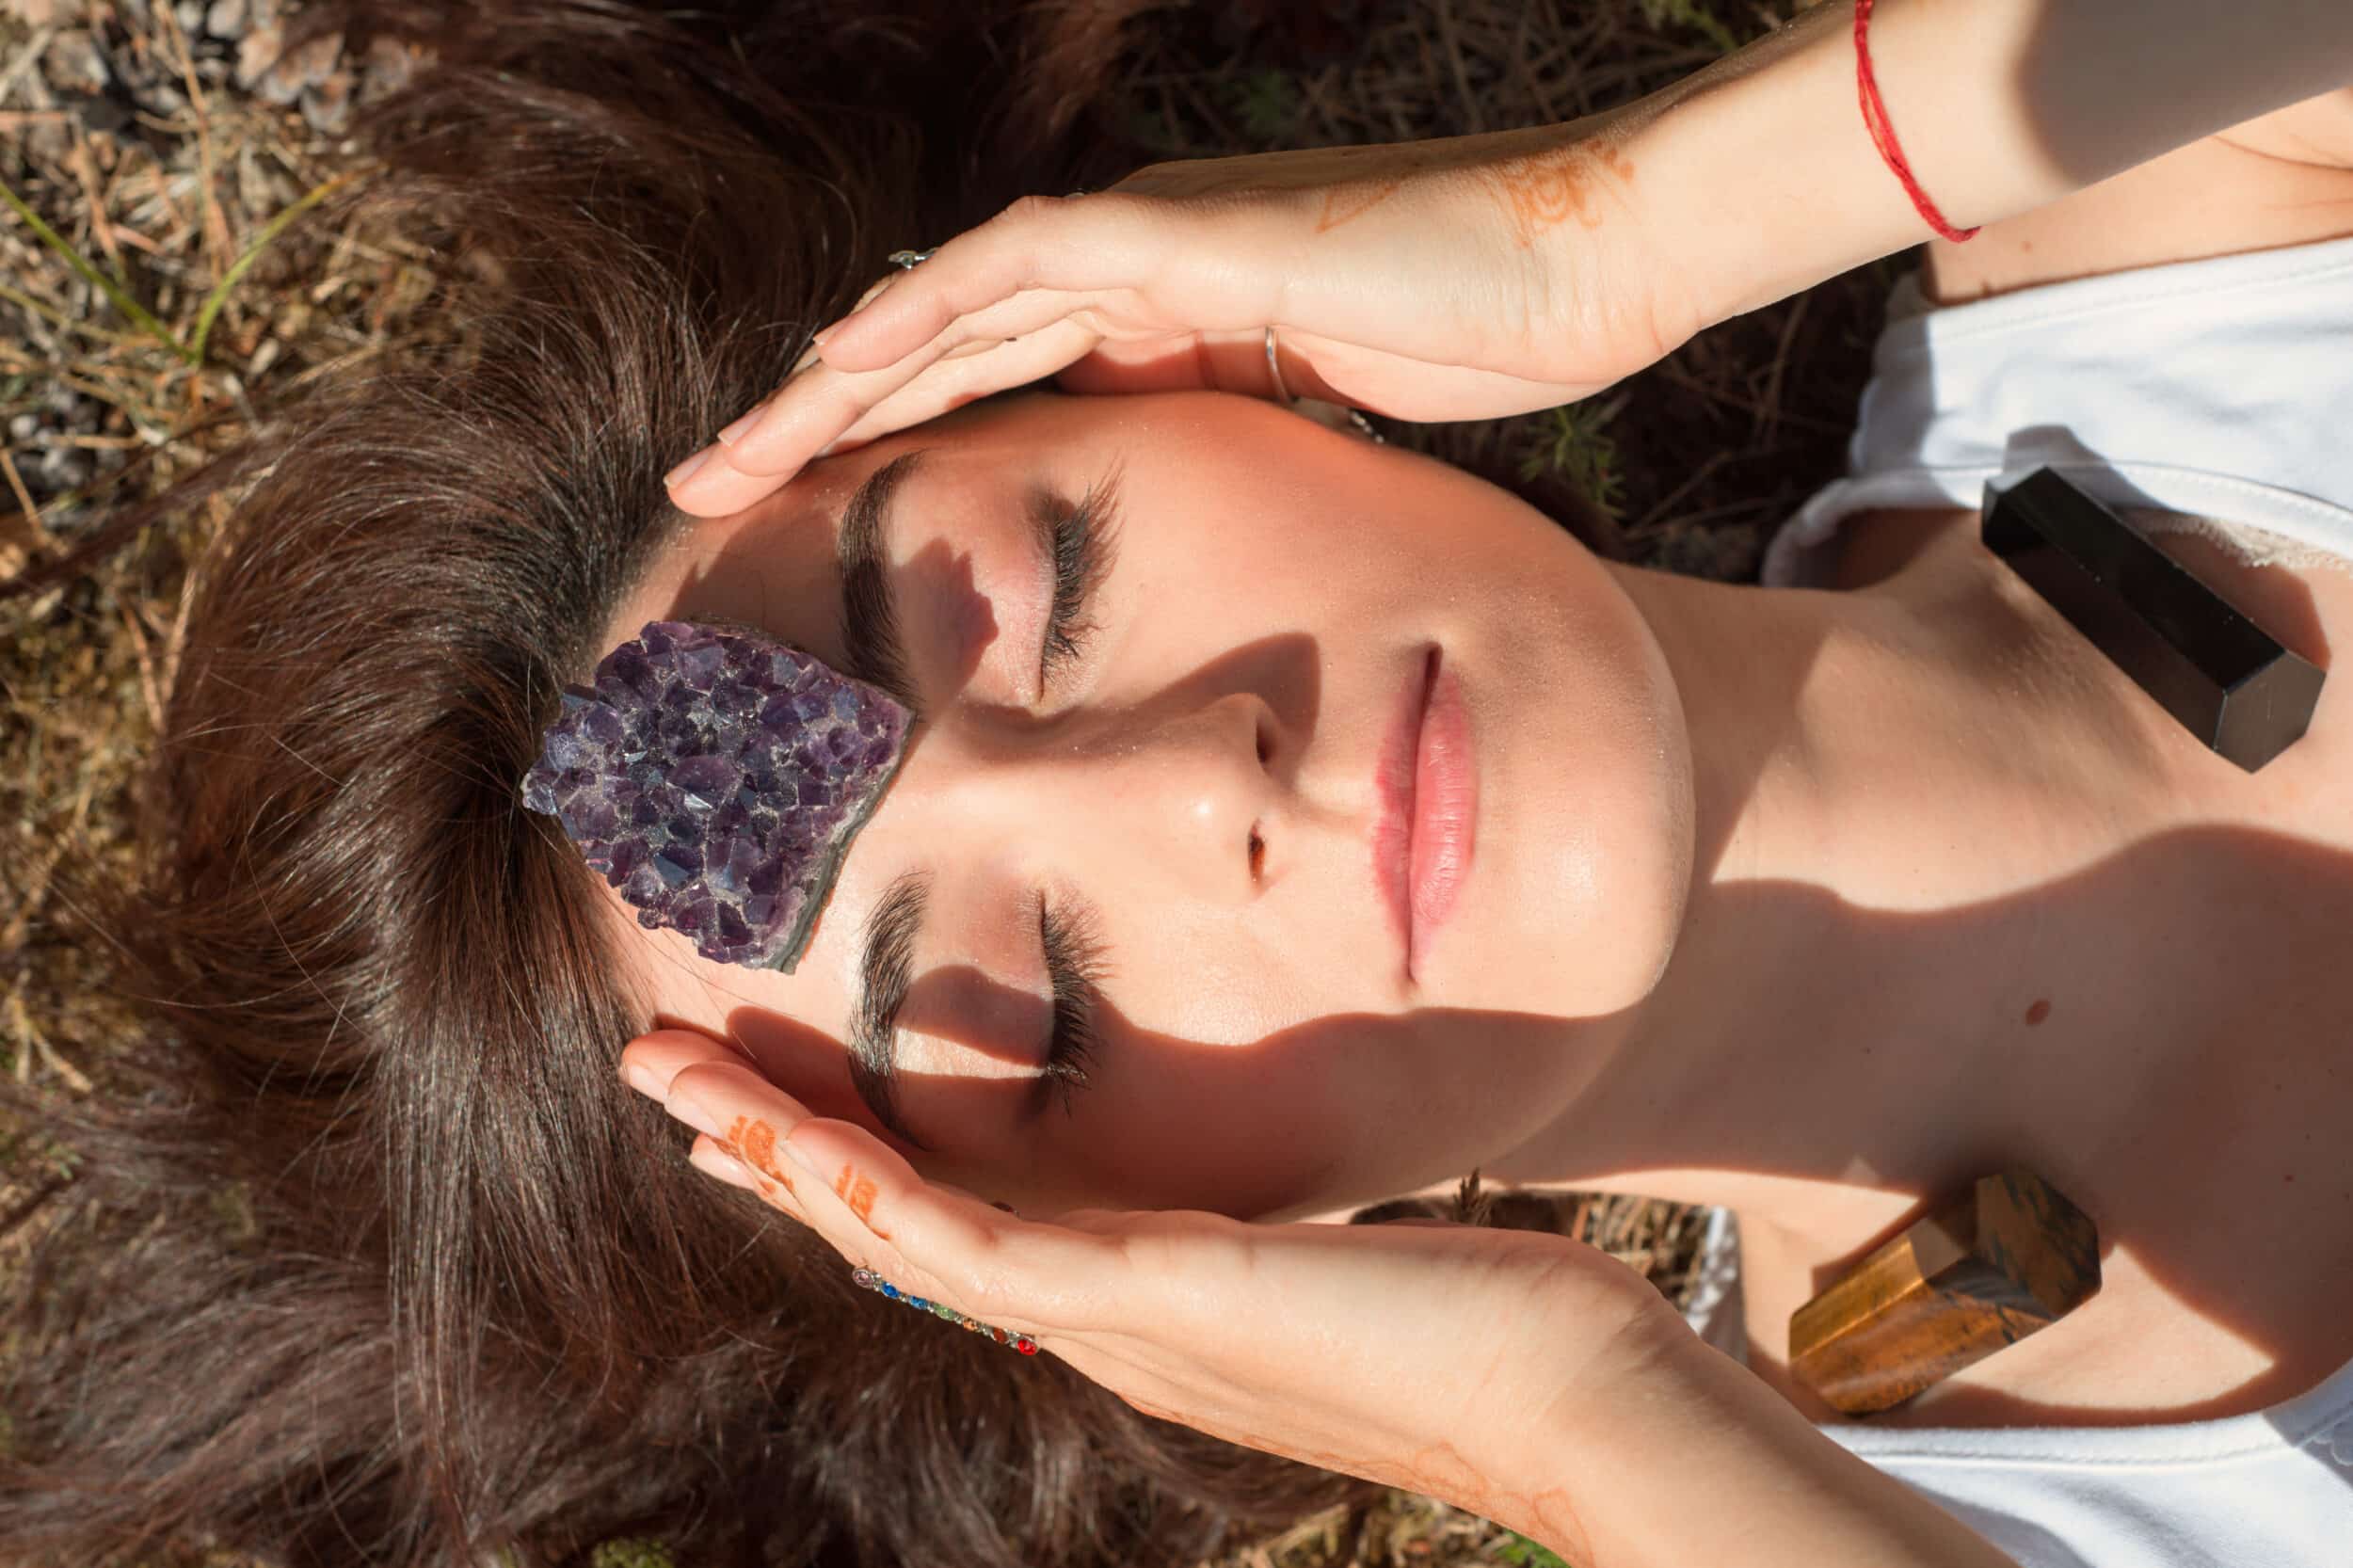 Woman,Puts,Amethyst,Stone,On,Her,Forehead